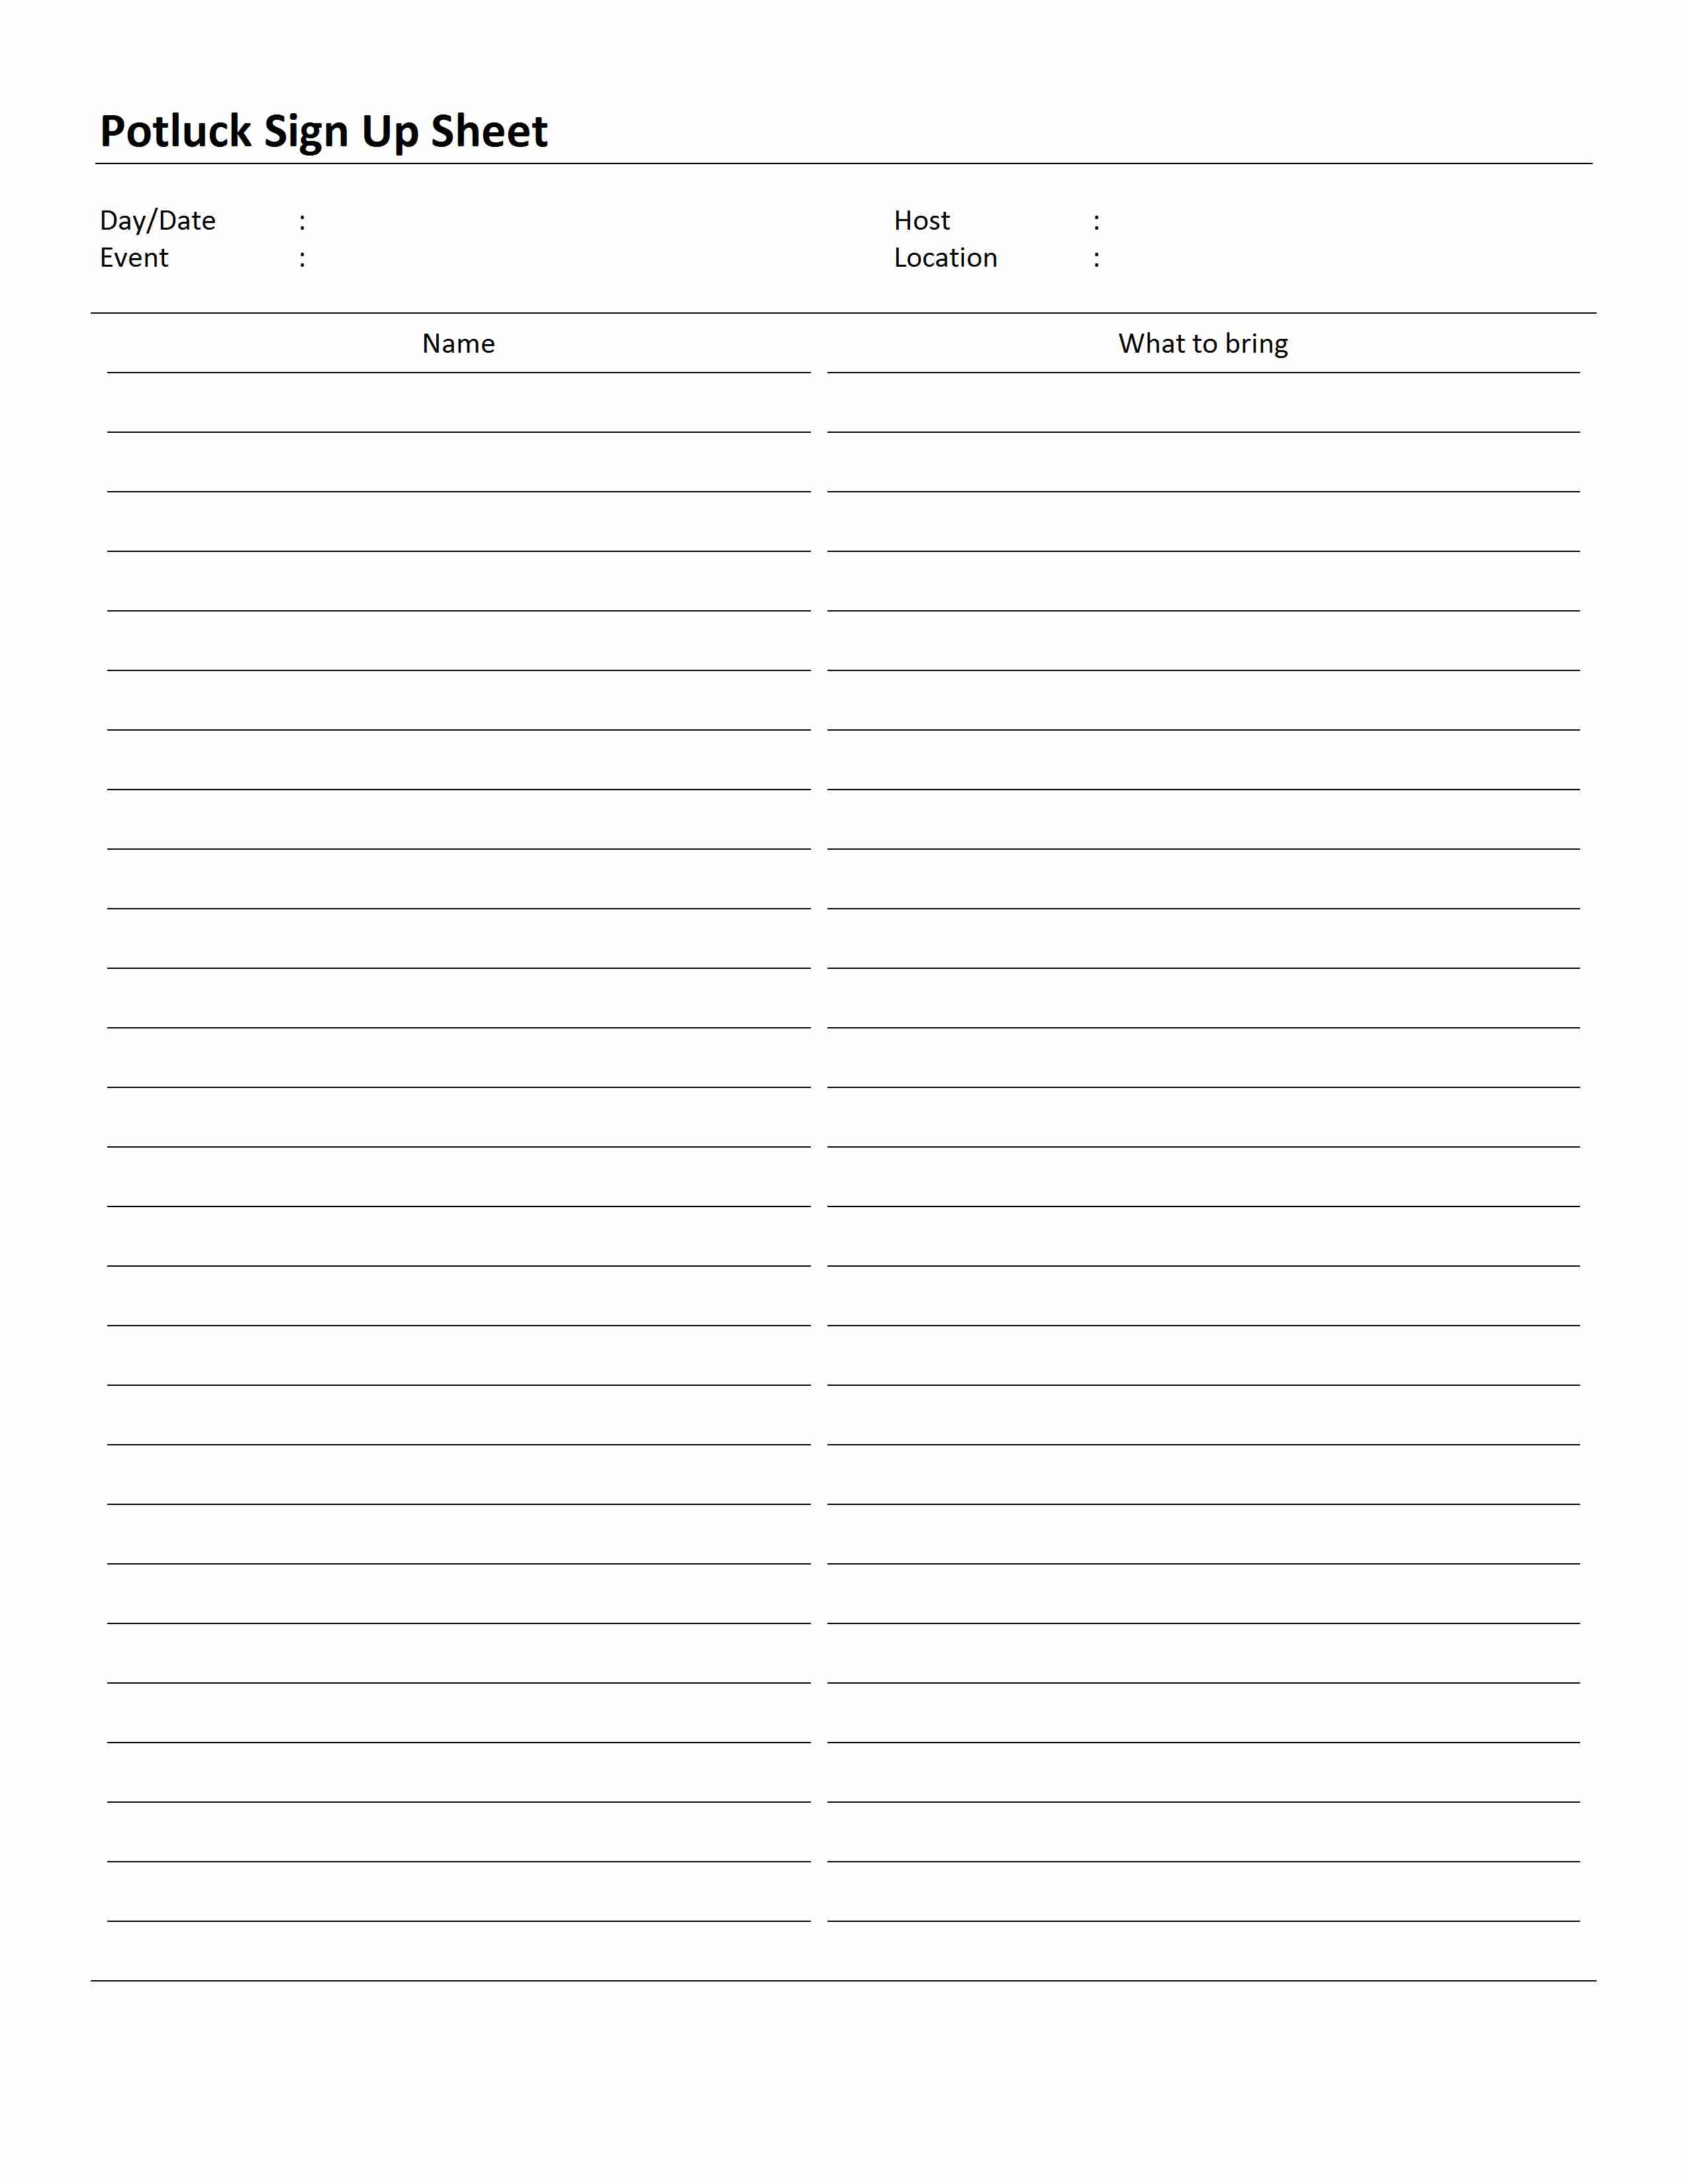 free-printable-potluck-sign-up-sheet-template-word